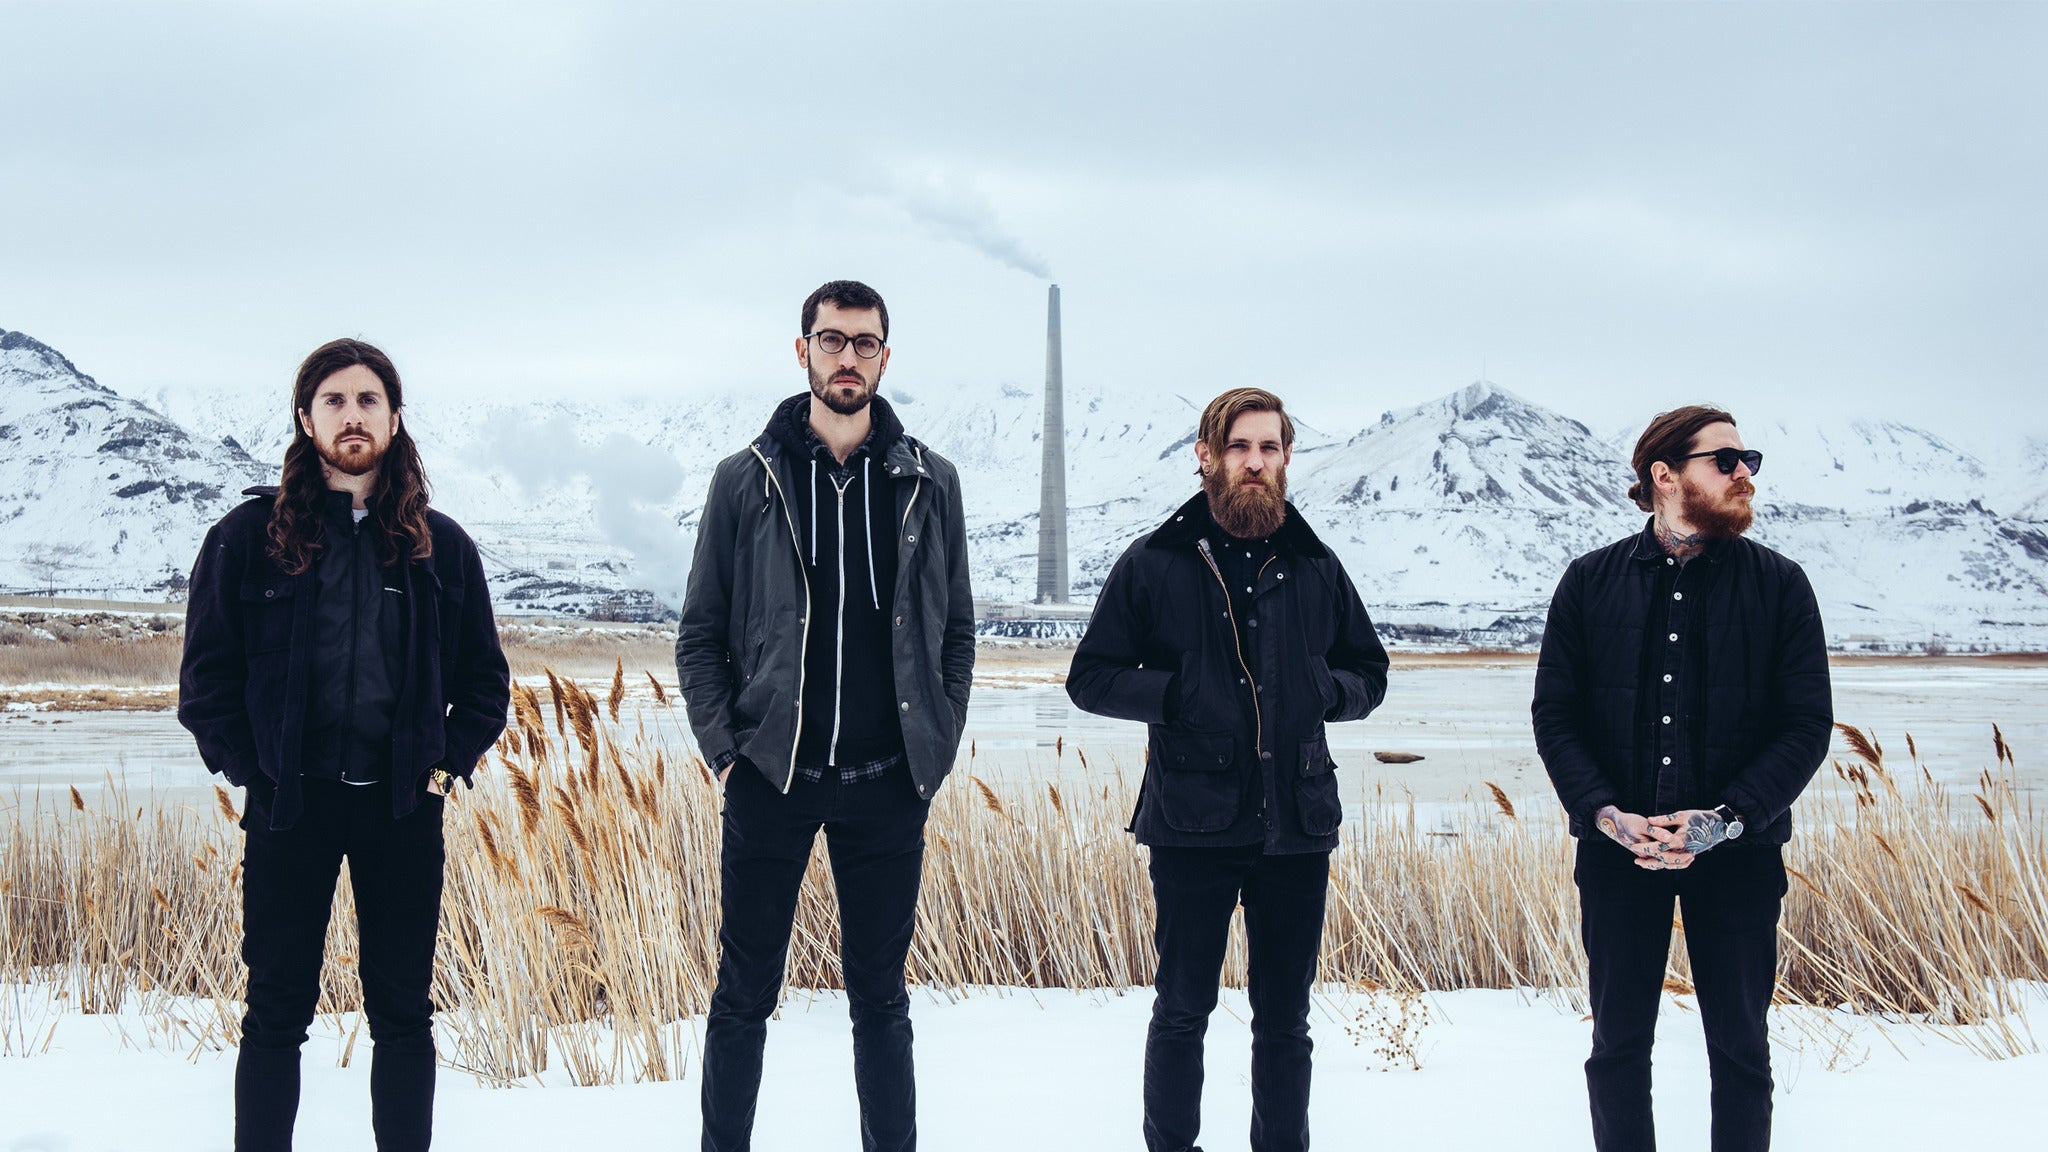 THE DEVIL WEARS PRADA RELEASE MUSIC VIDEO FOR “THE THREAD”